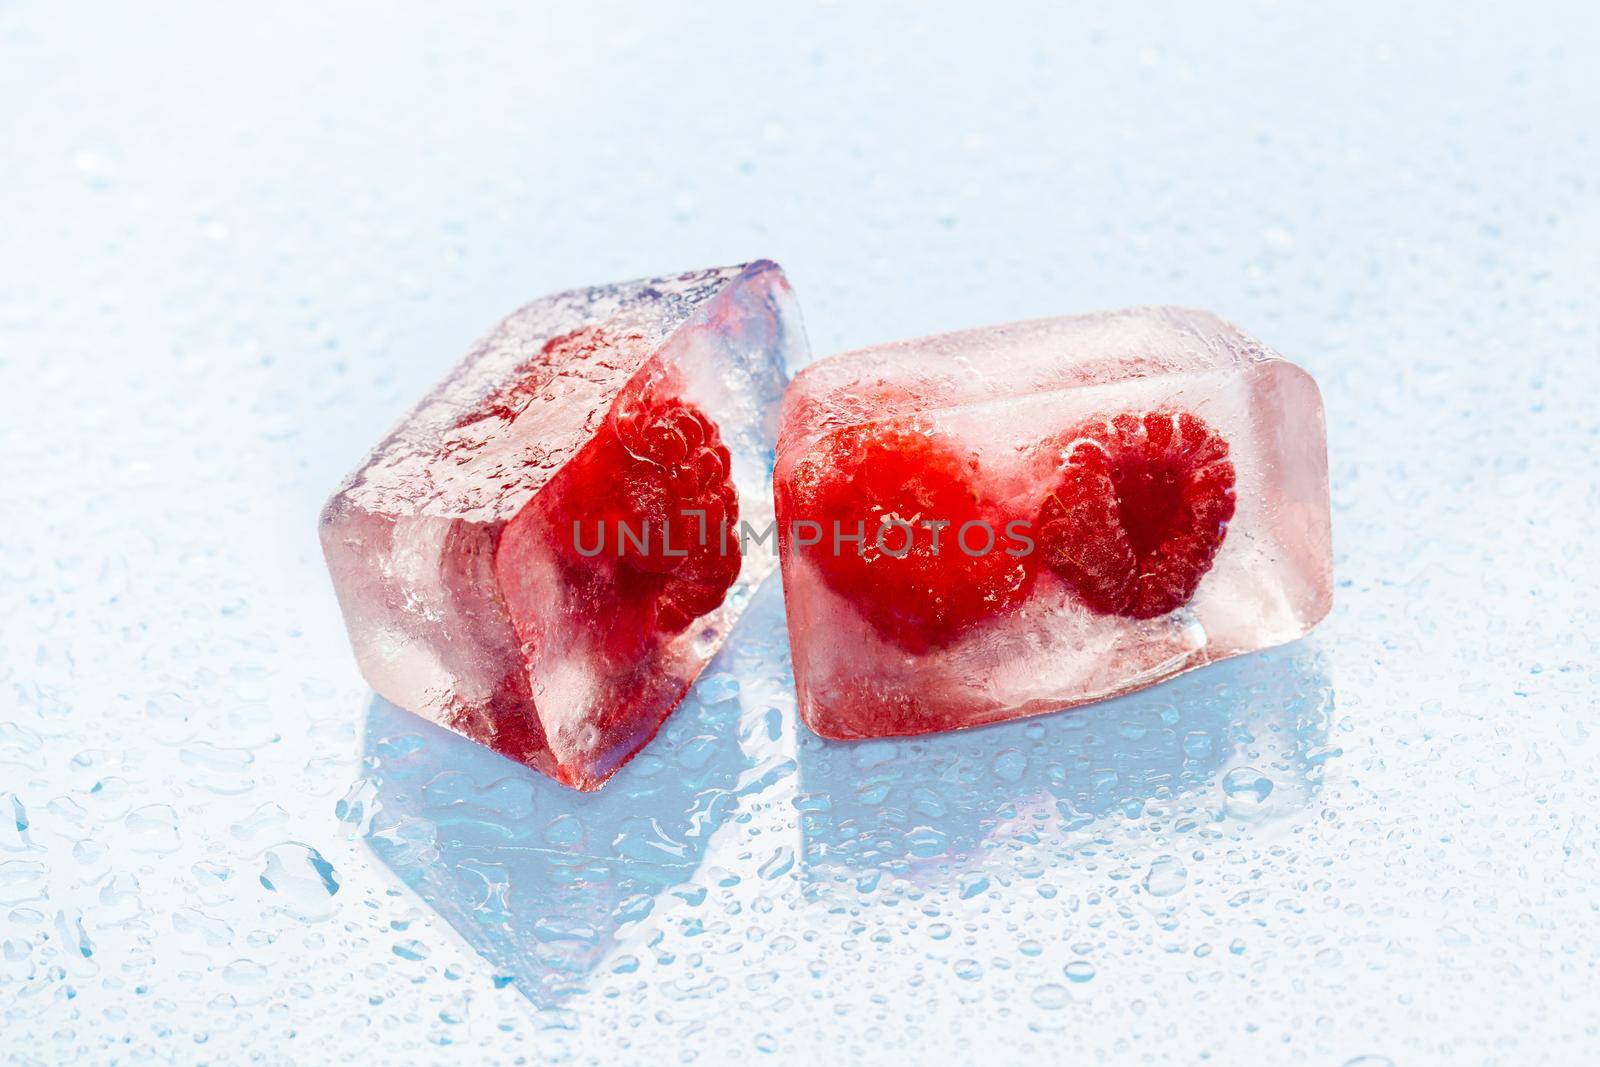 Ice cubes with frozen berries inside close up by Fabrikasimf